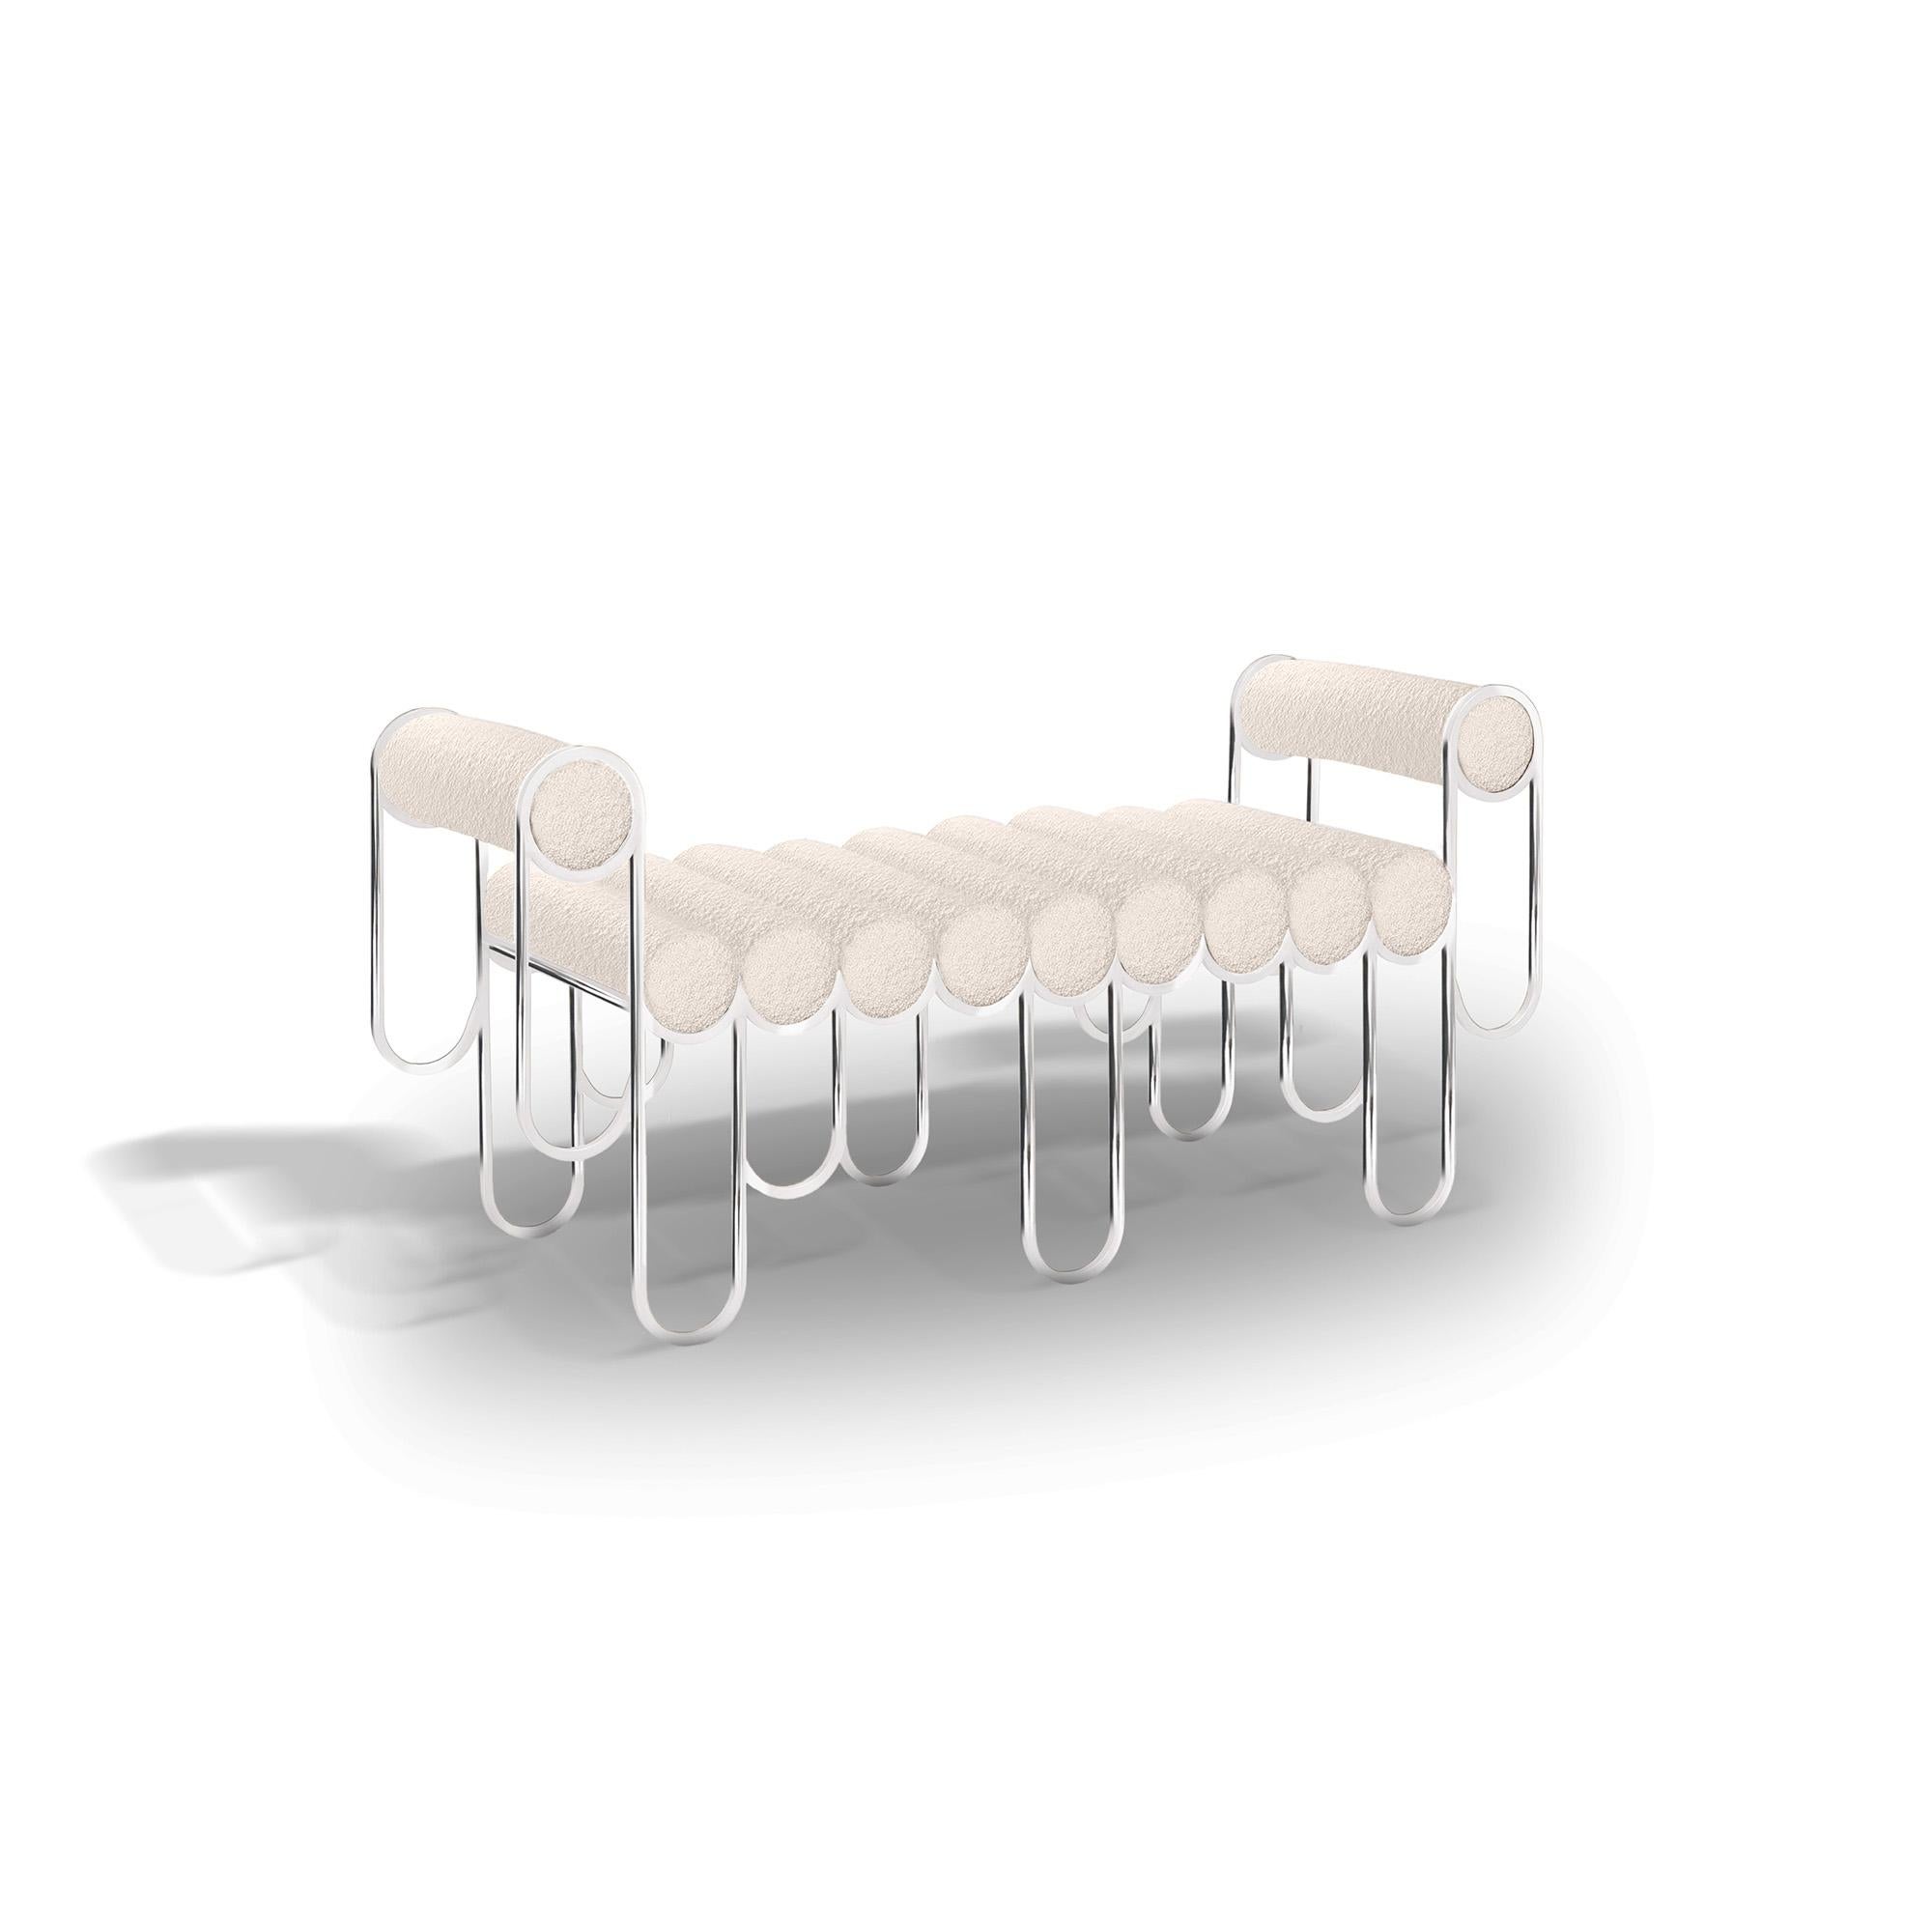 The Apollo loveseat comprises of a series of playfully fine, elongated metal loops, which embrace the upholstered cushion rolls together to form its long, wavy floating seat. The two armrests are held by further configurations of fine looping